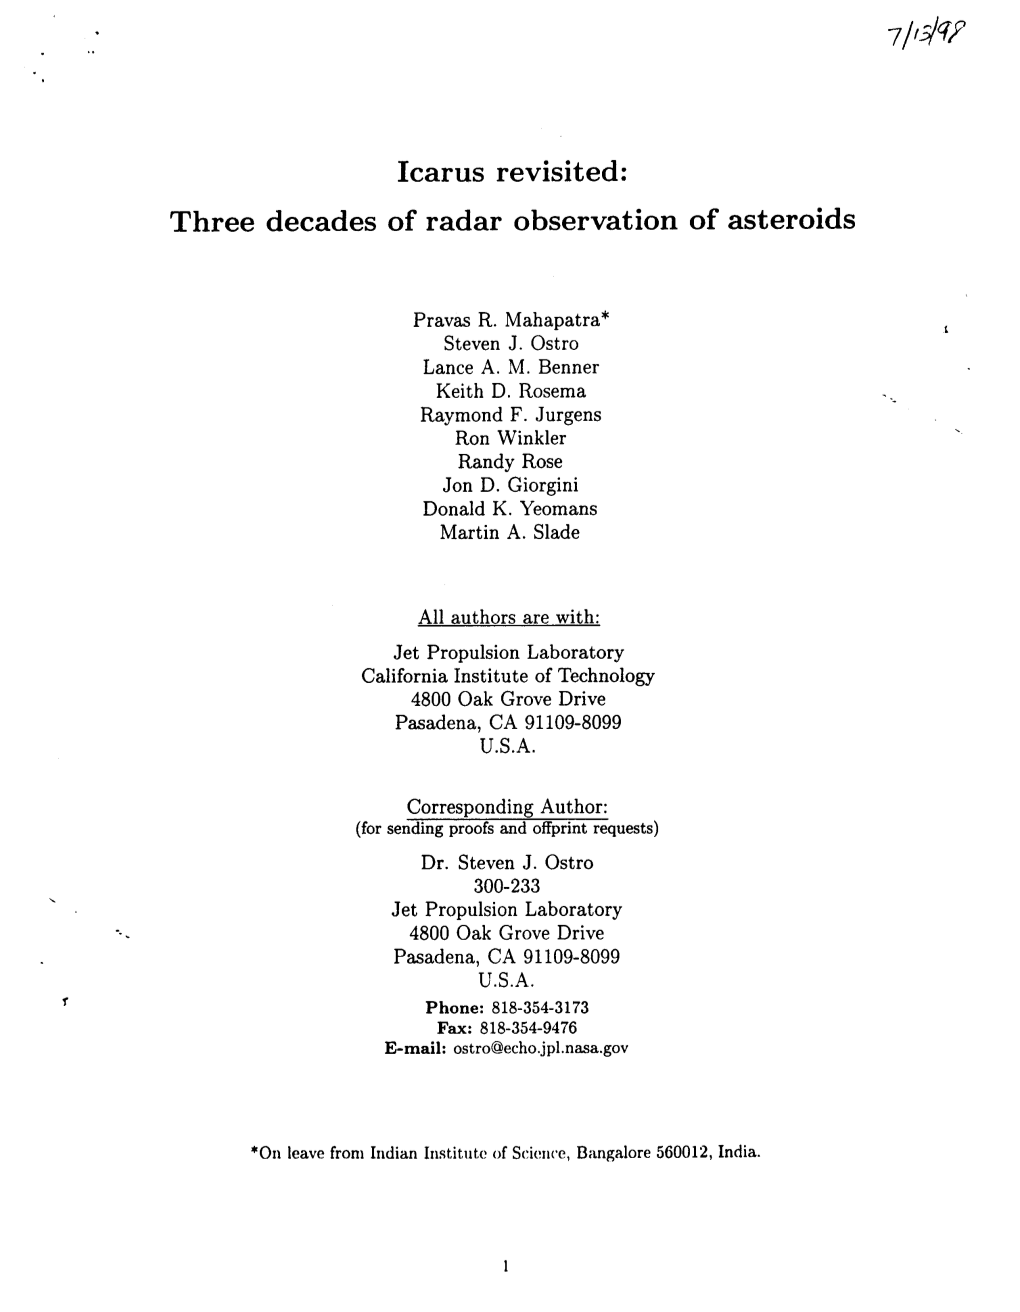 Icarus Revisited: Three Decades of Radar Observation of Asteroids